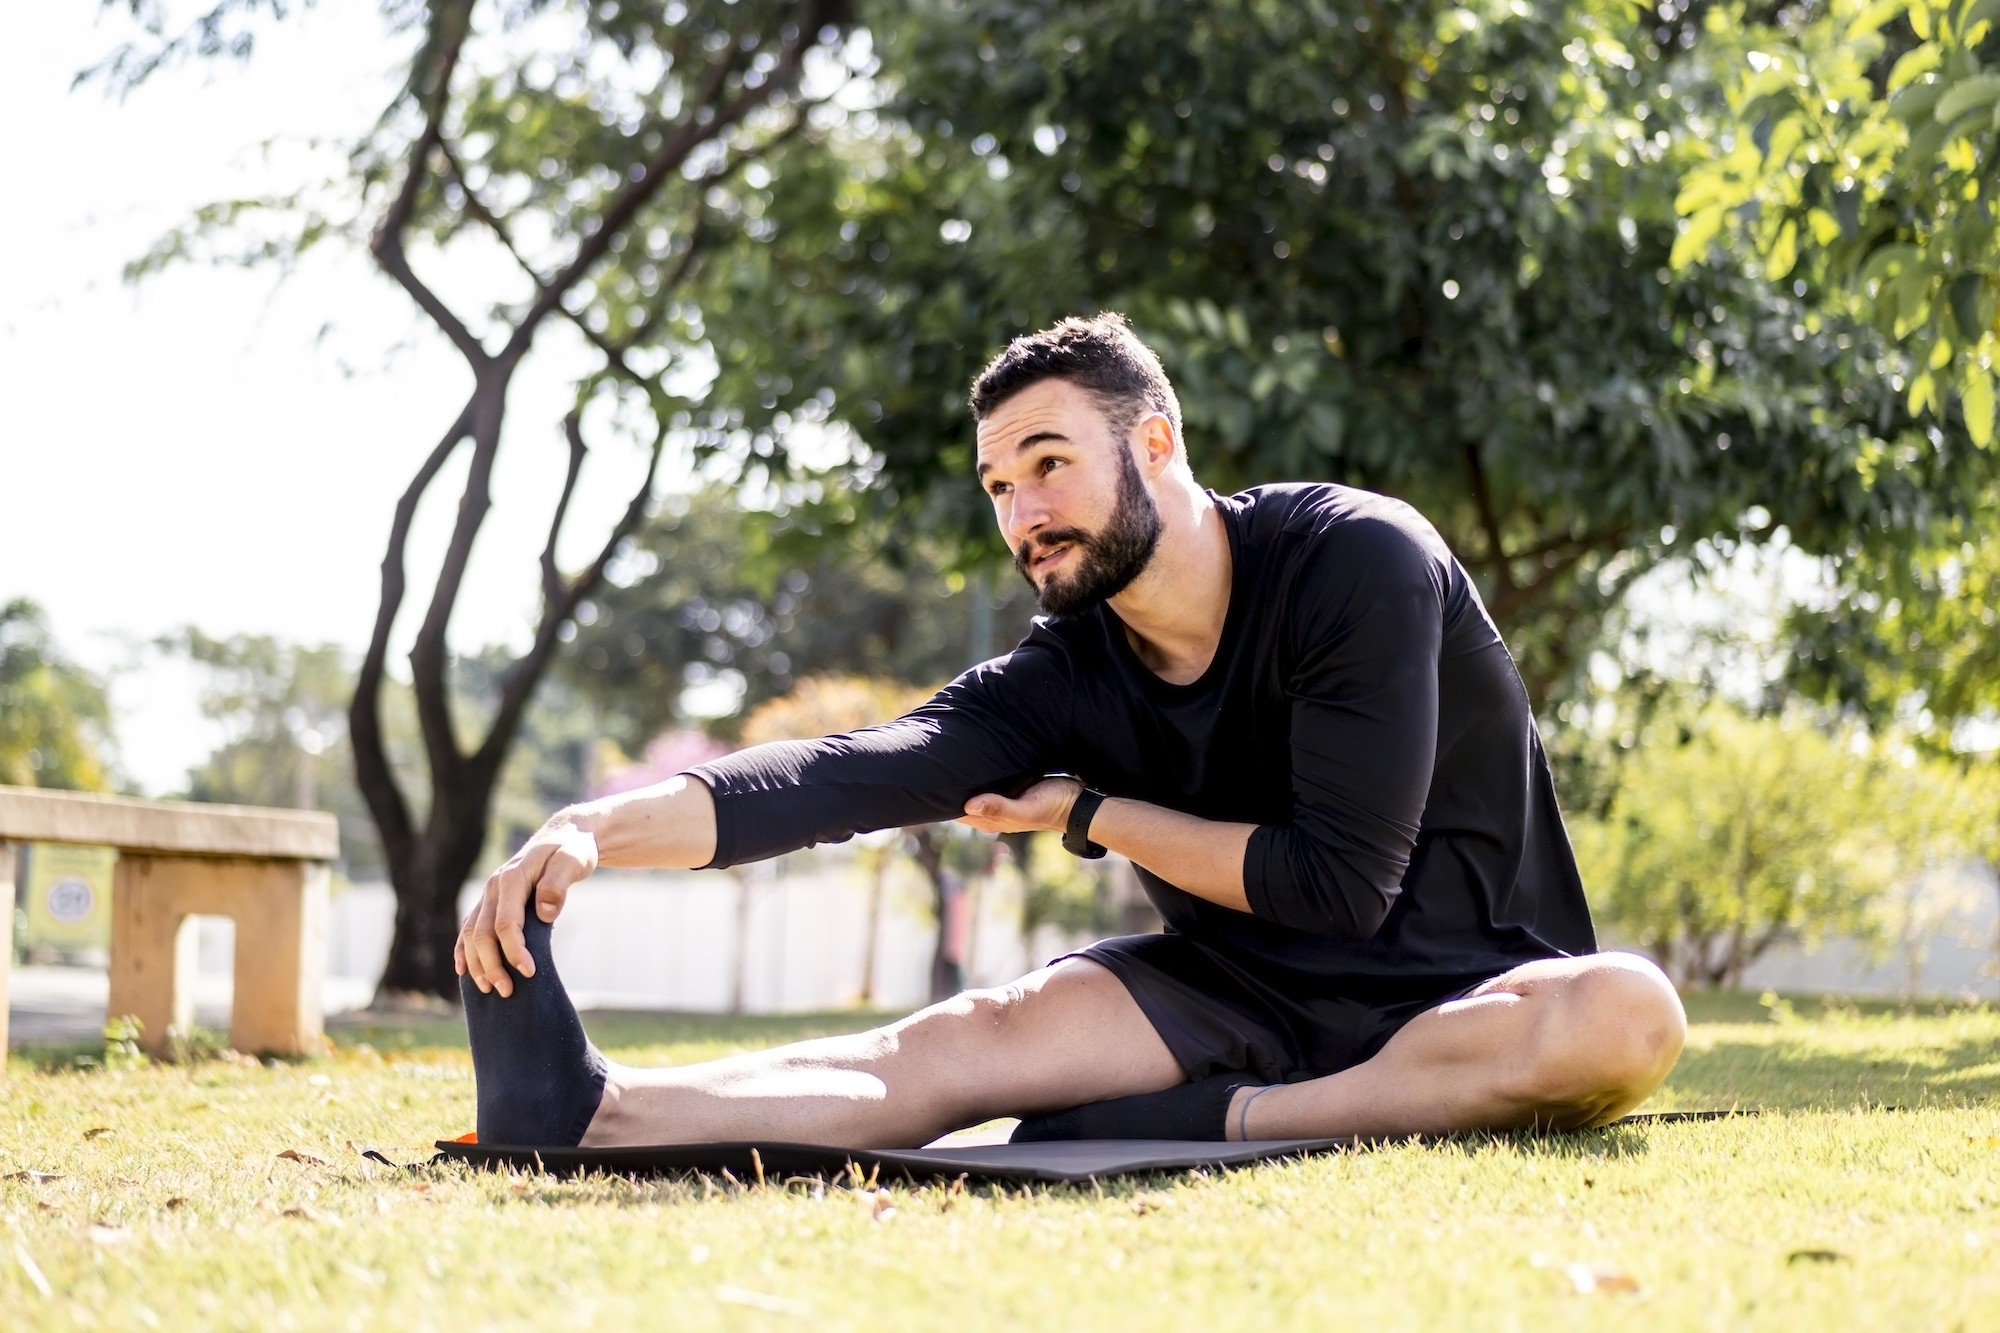 Young man smiling and sitting down in a park while stretching his right hamstring